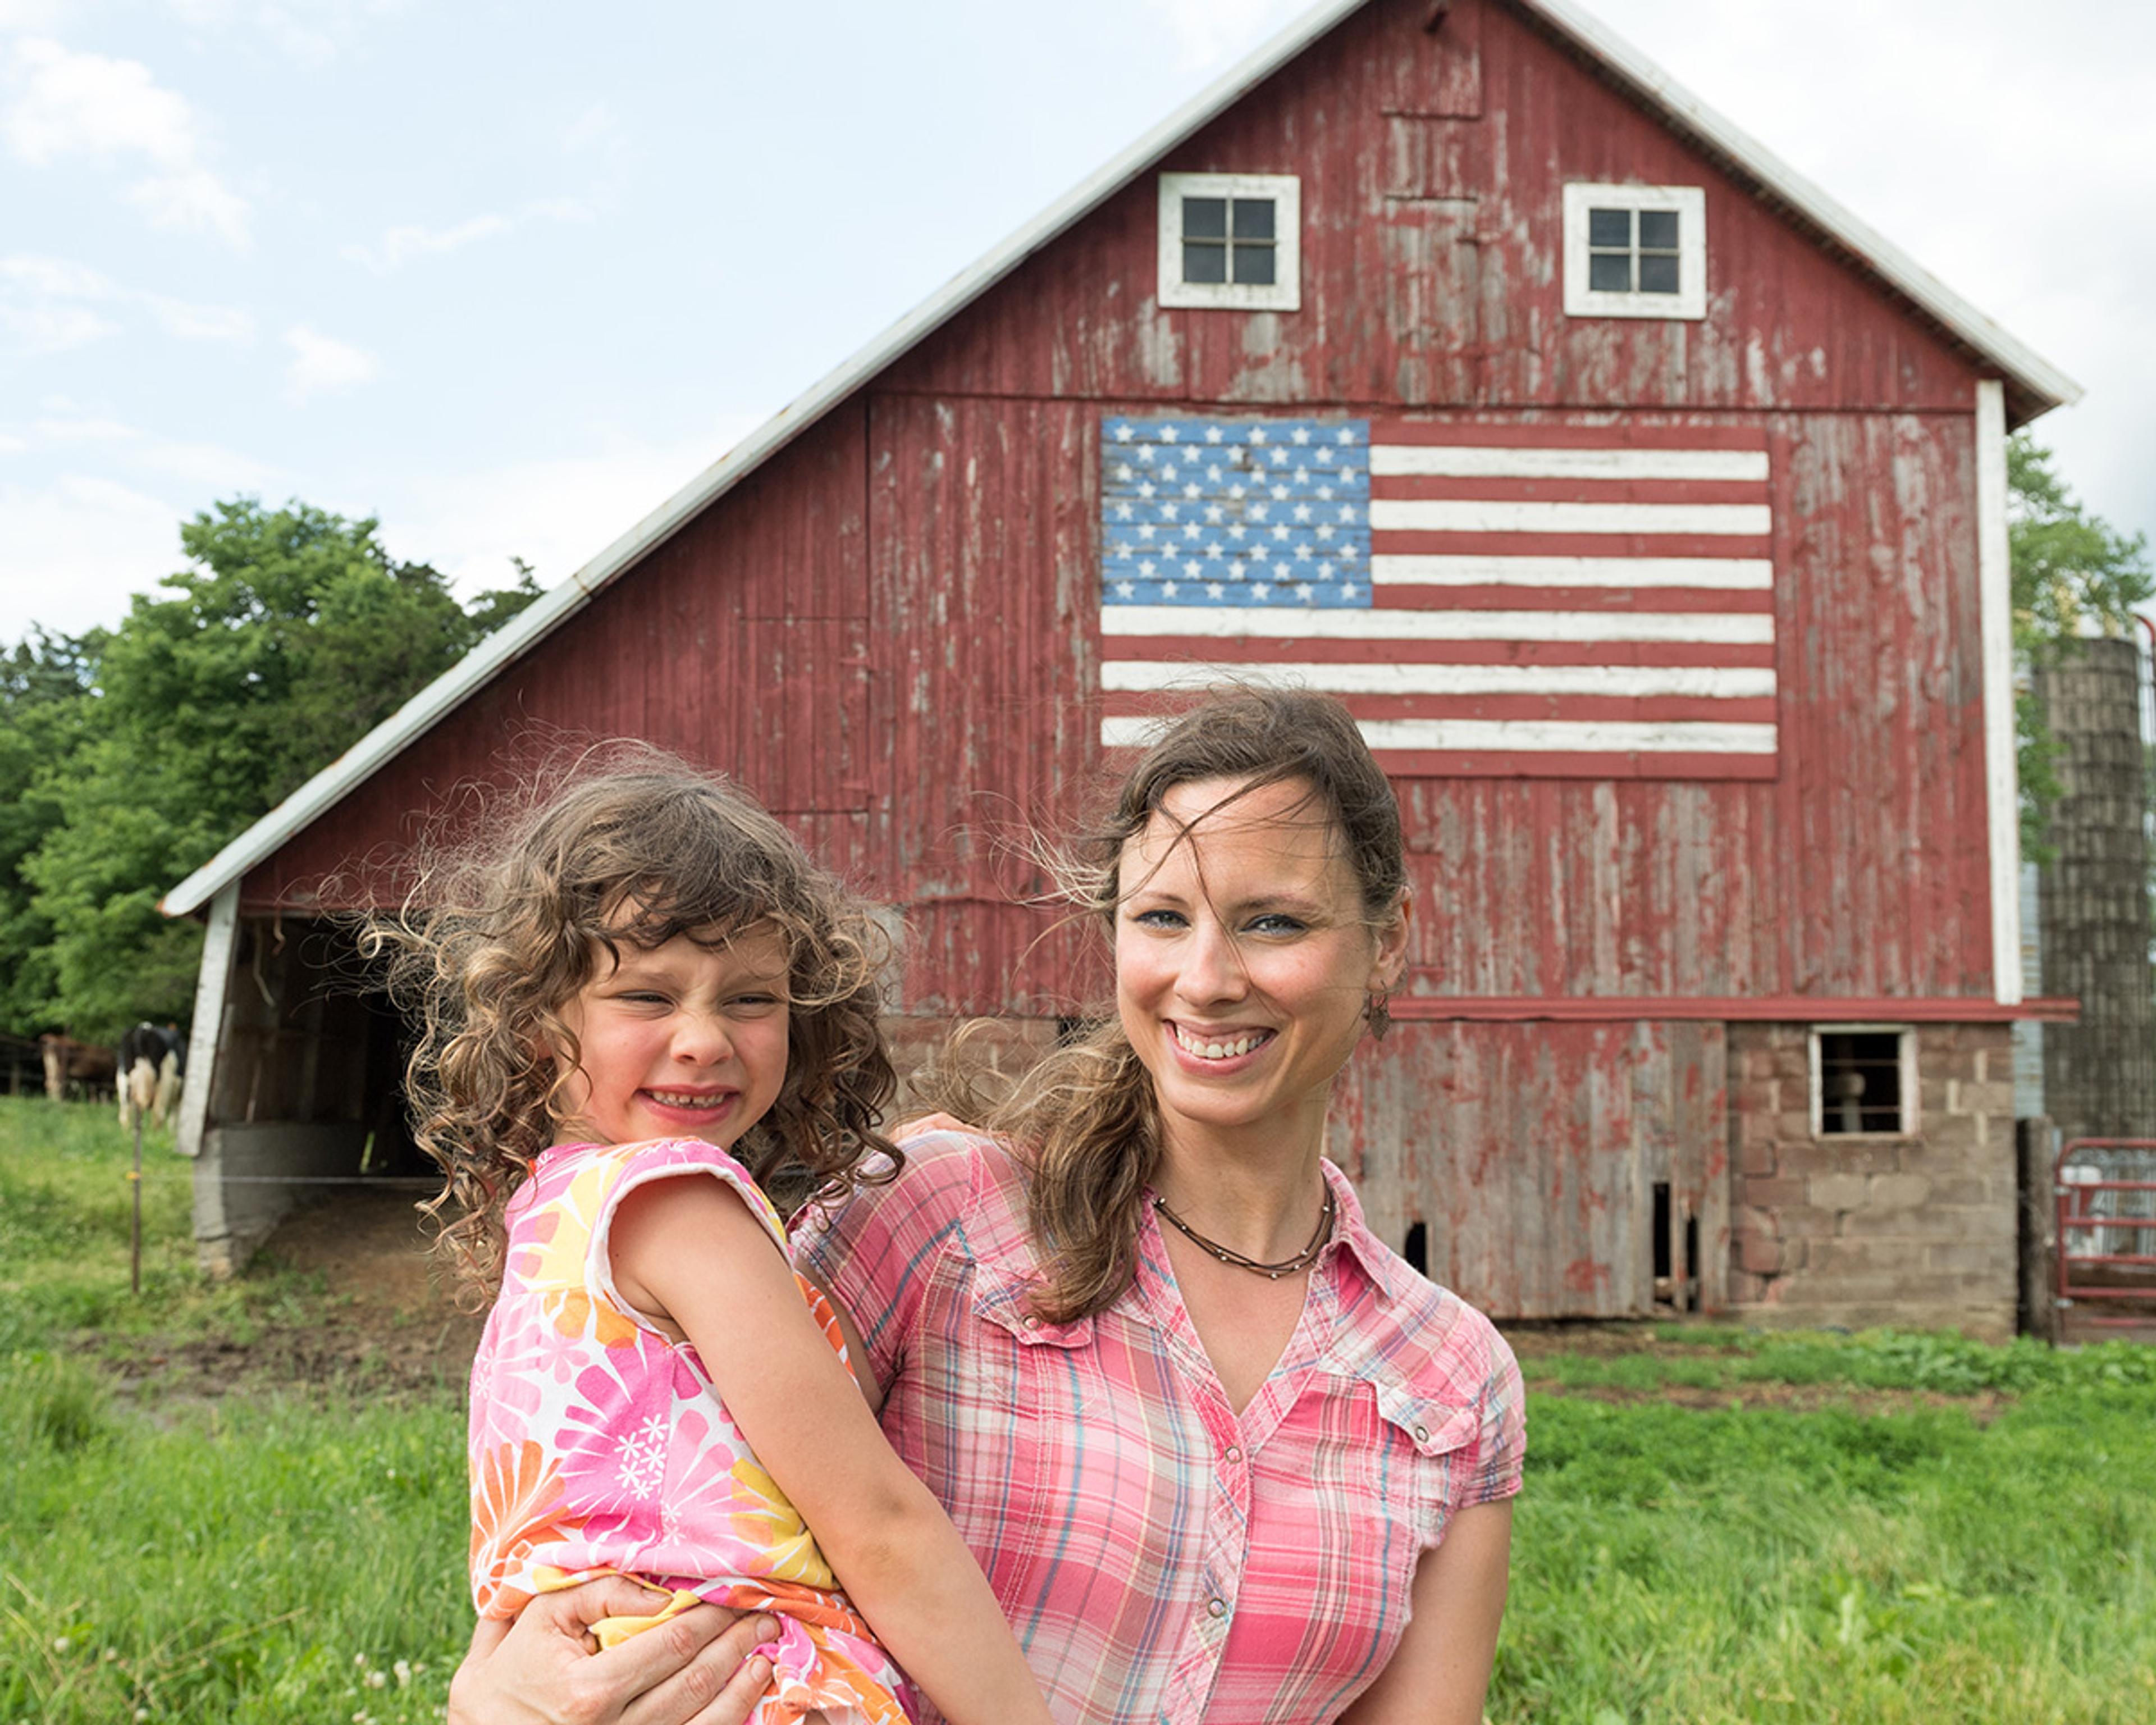 Mom Heidi Vosberg holds daughter Rachel in front of their red barn with an American flag painted on it.